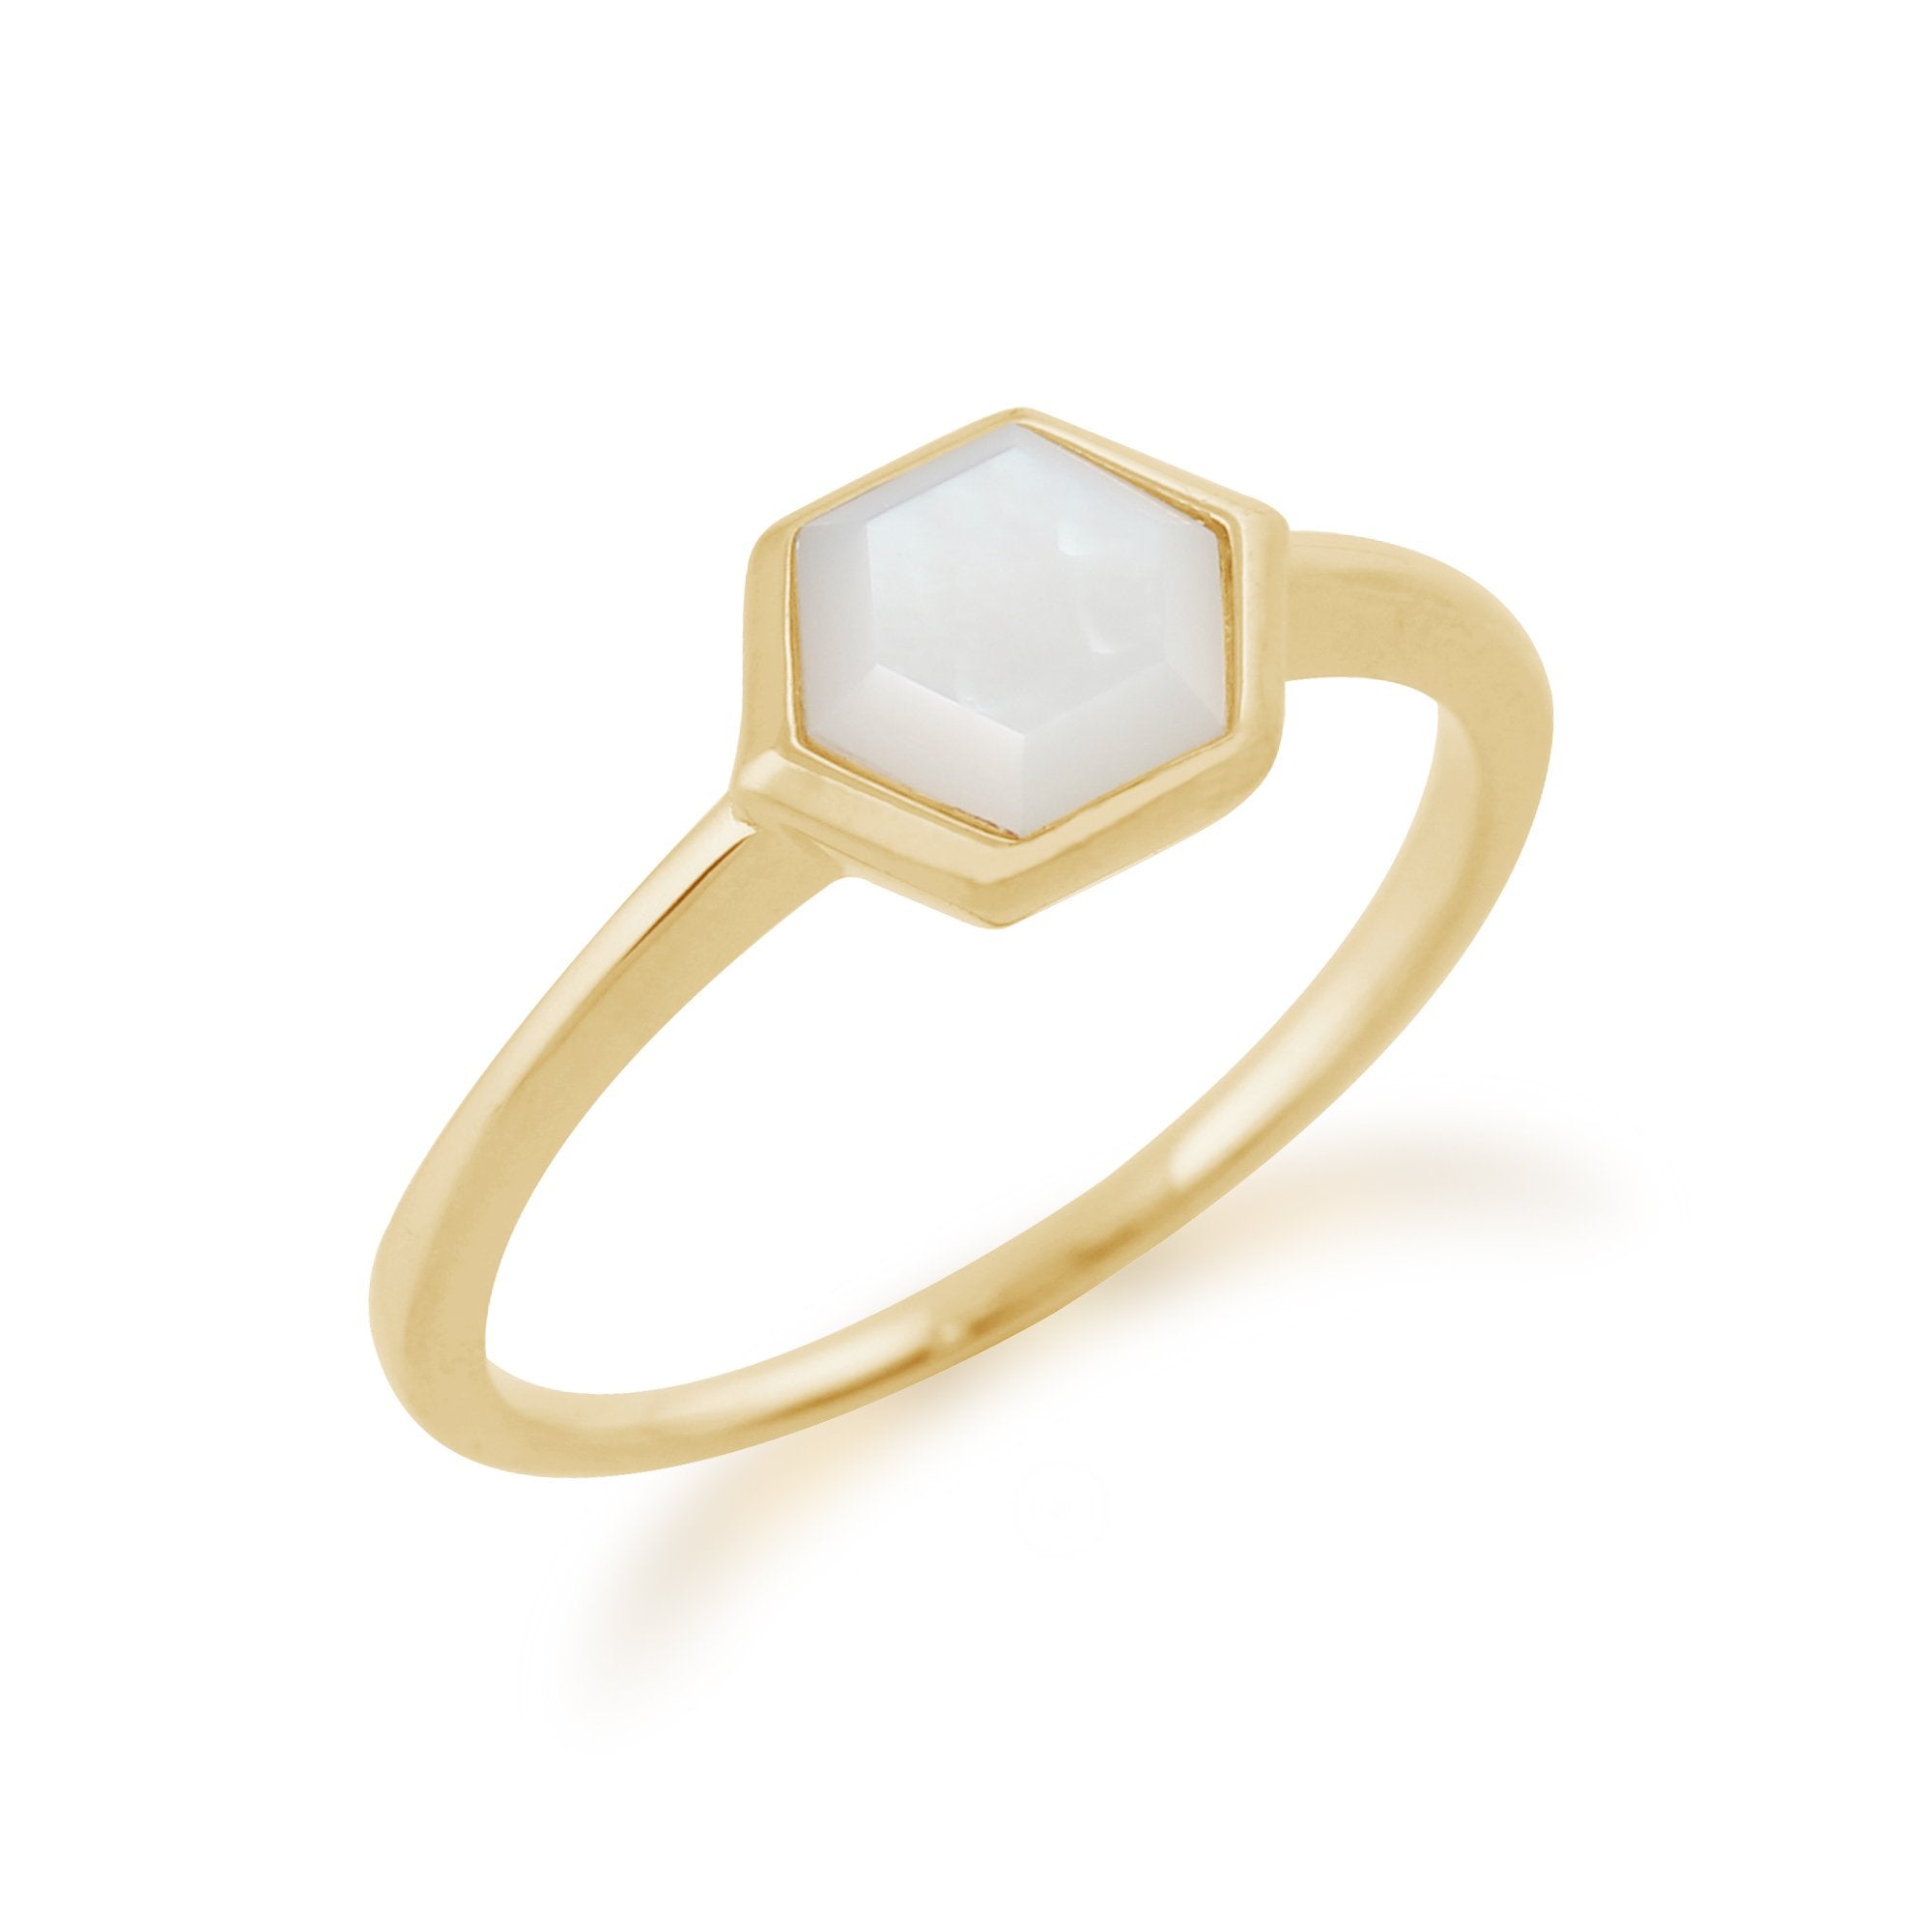 Gemondo Gold Plated Sterling Silver 1.1ct Mother of Pearl Hexagonal Prism Ring Image 2